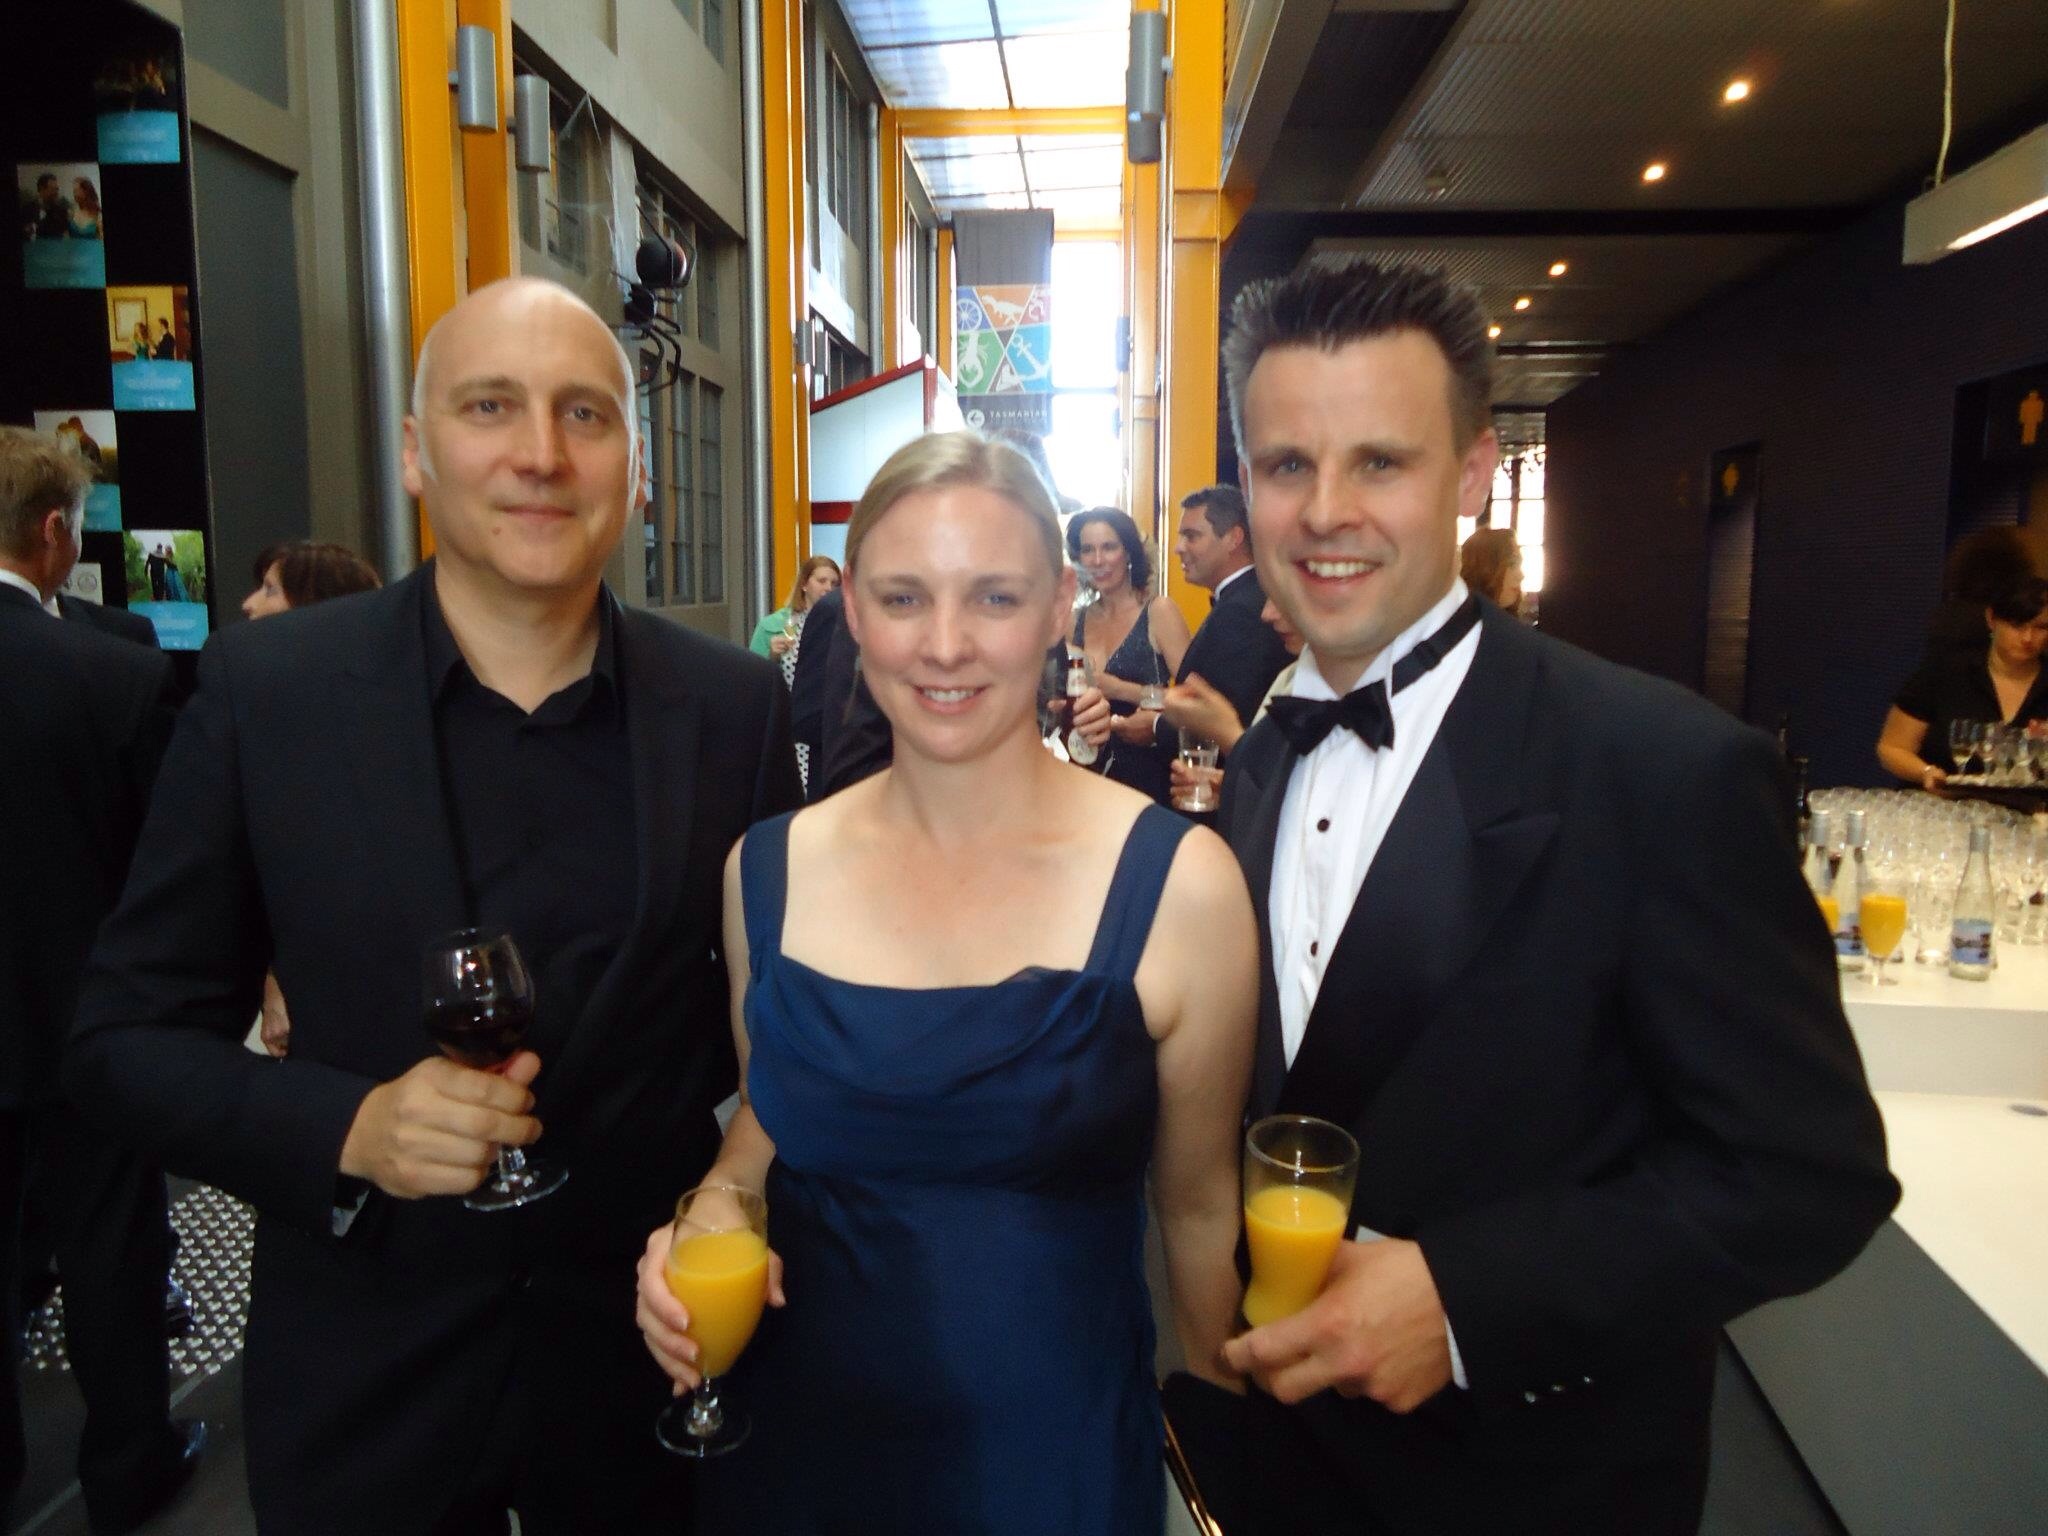 Lincoln Fenner with his wife Natasha Fenner and Vincent Sheehan (Producer of the Oscar Nominated ANIMAL KINGDOM).